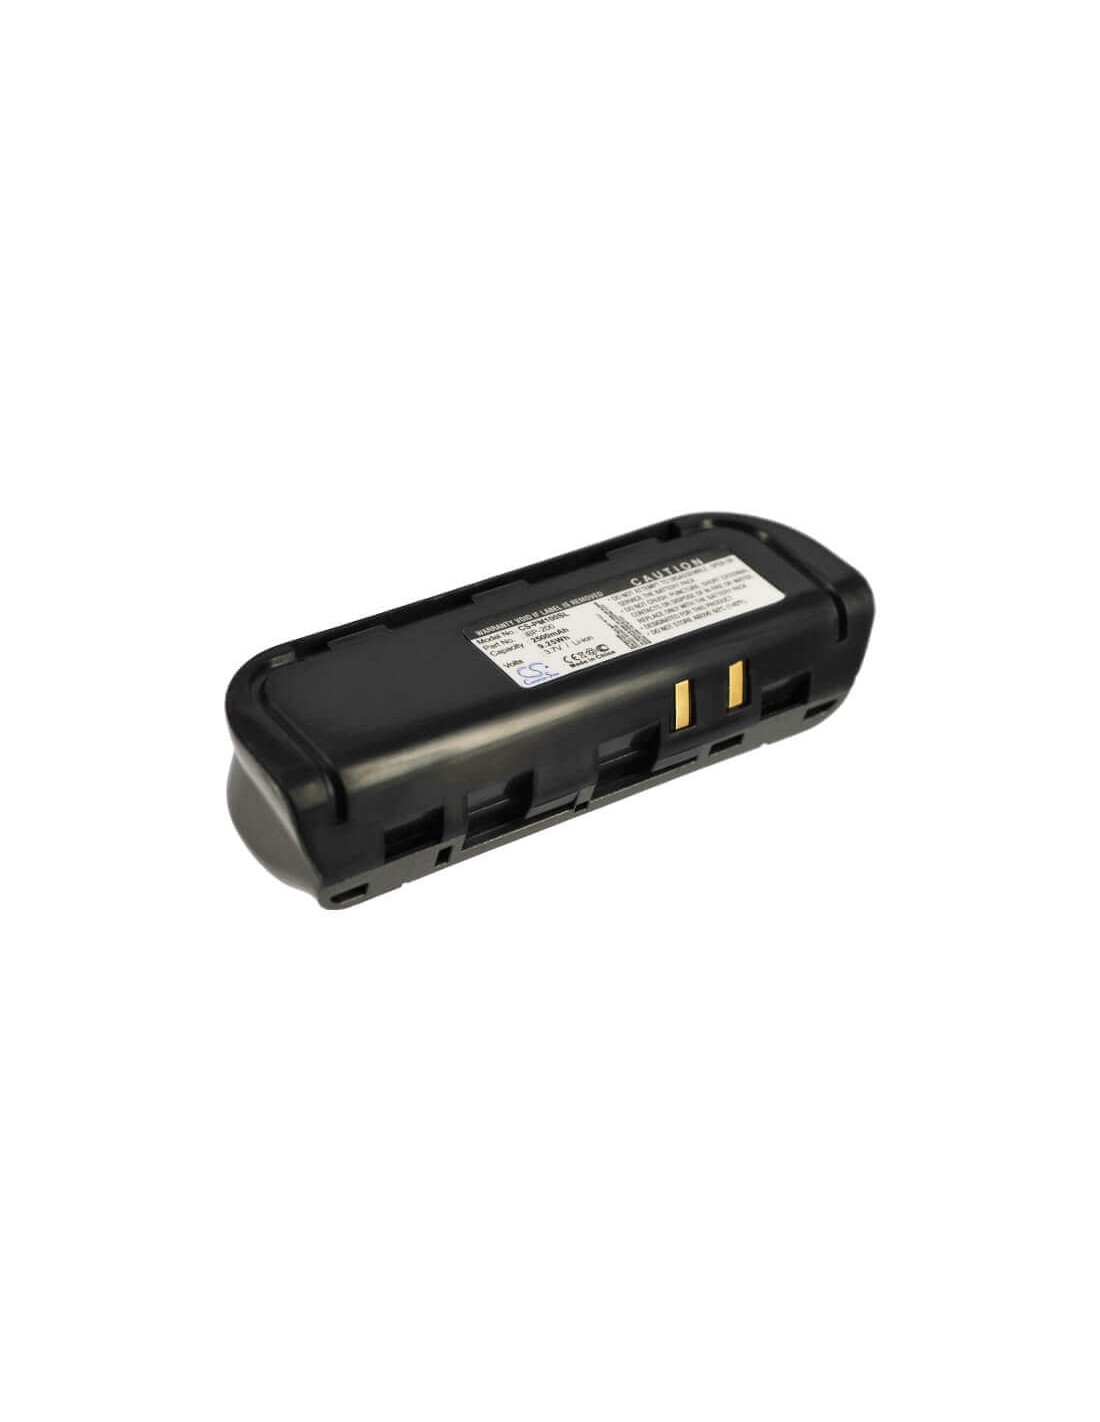 Battery for Iriver Pmp-100, Pmp-120, Pmp-120 20gb 3.7V, 2500mAh - 9.25Wh